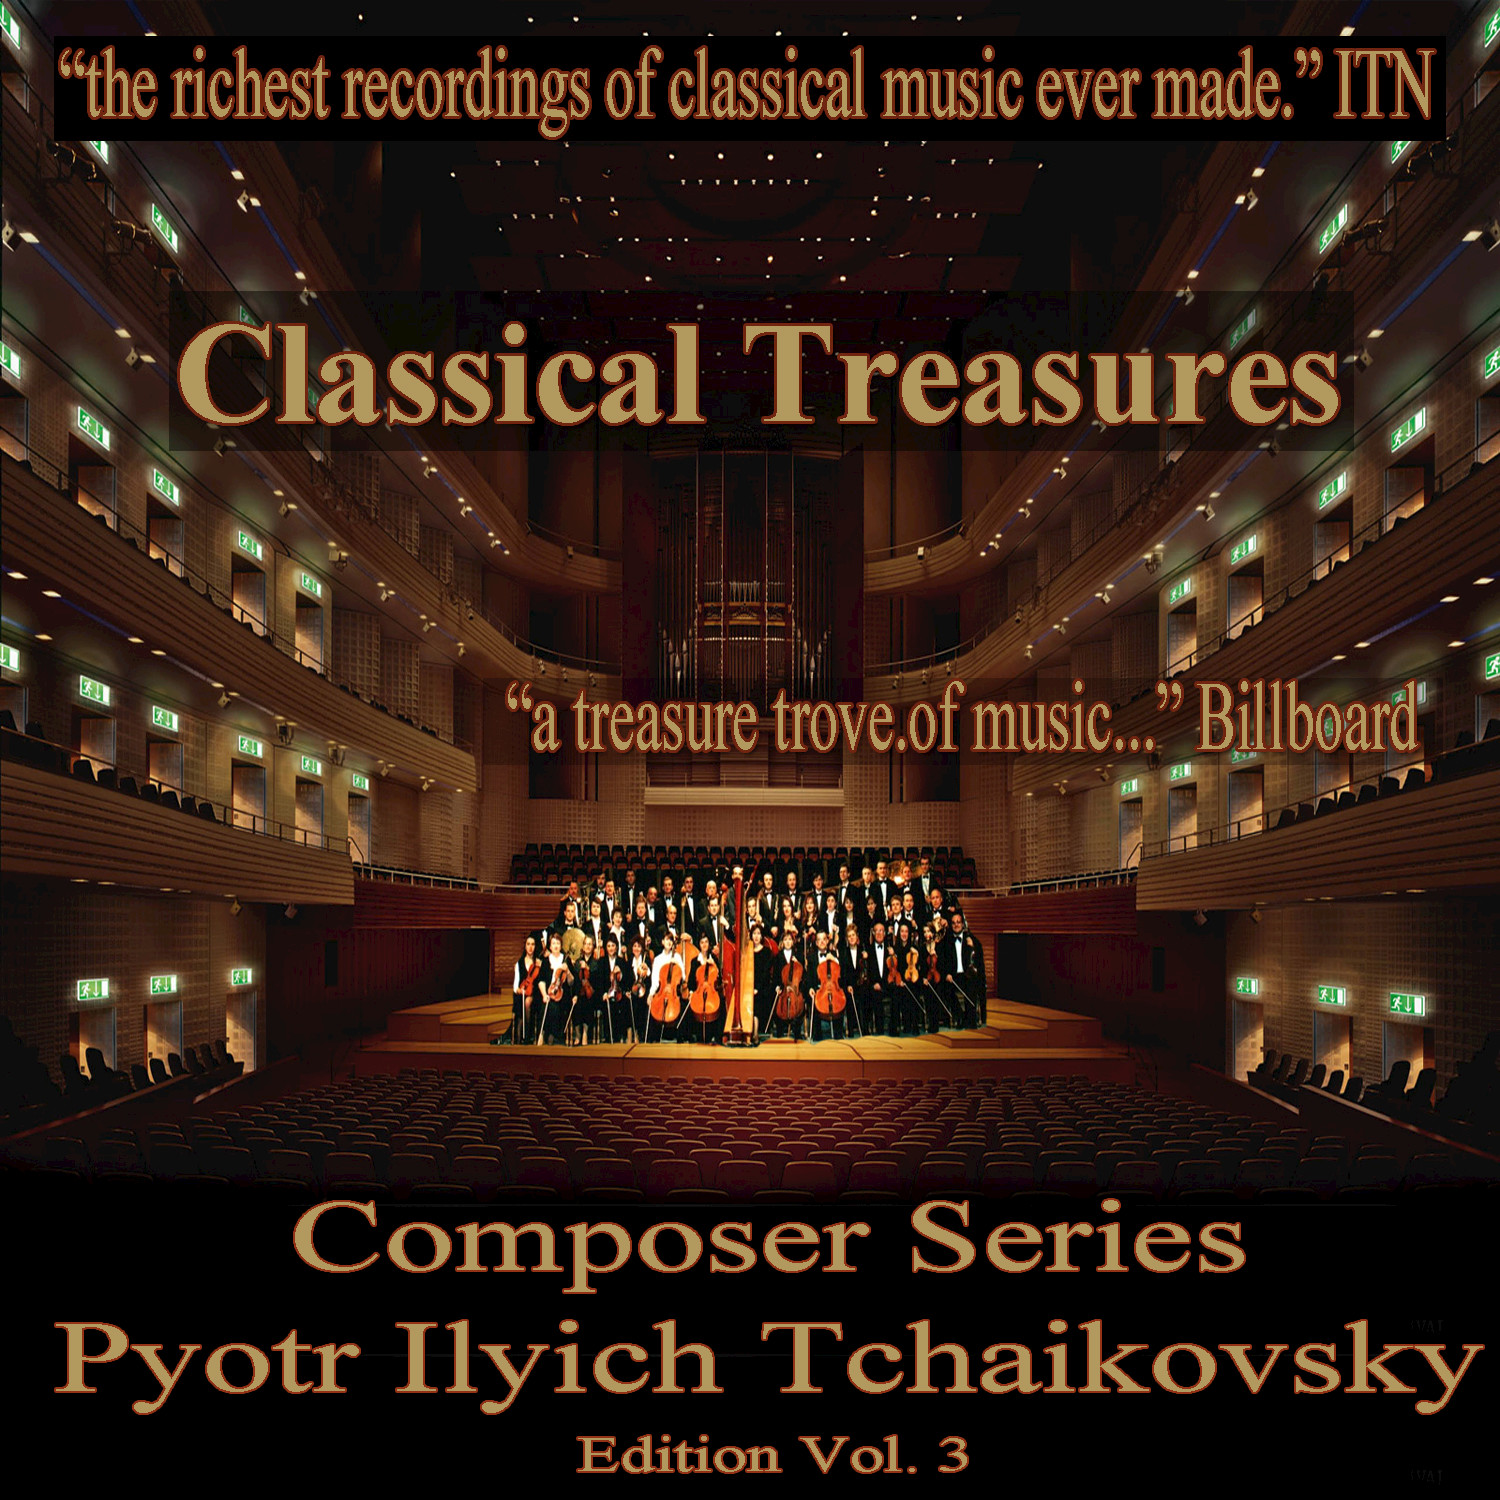 Classical Treasures Composer Series: Pytor Ilyich Tchaikovsky, Vol. 3